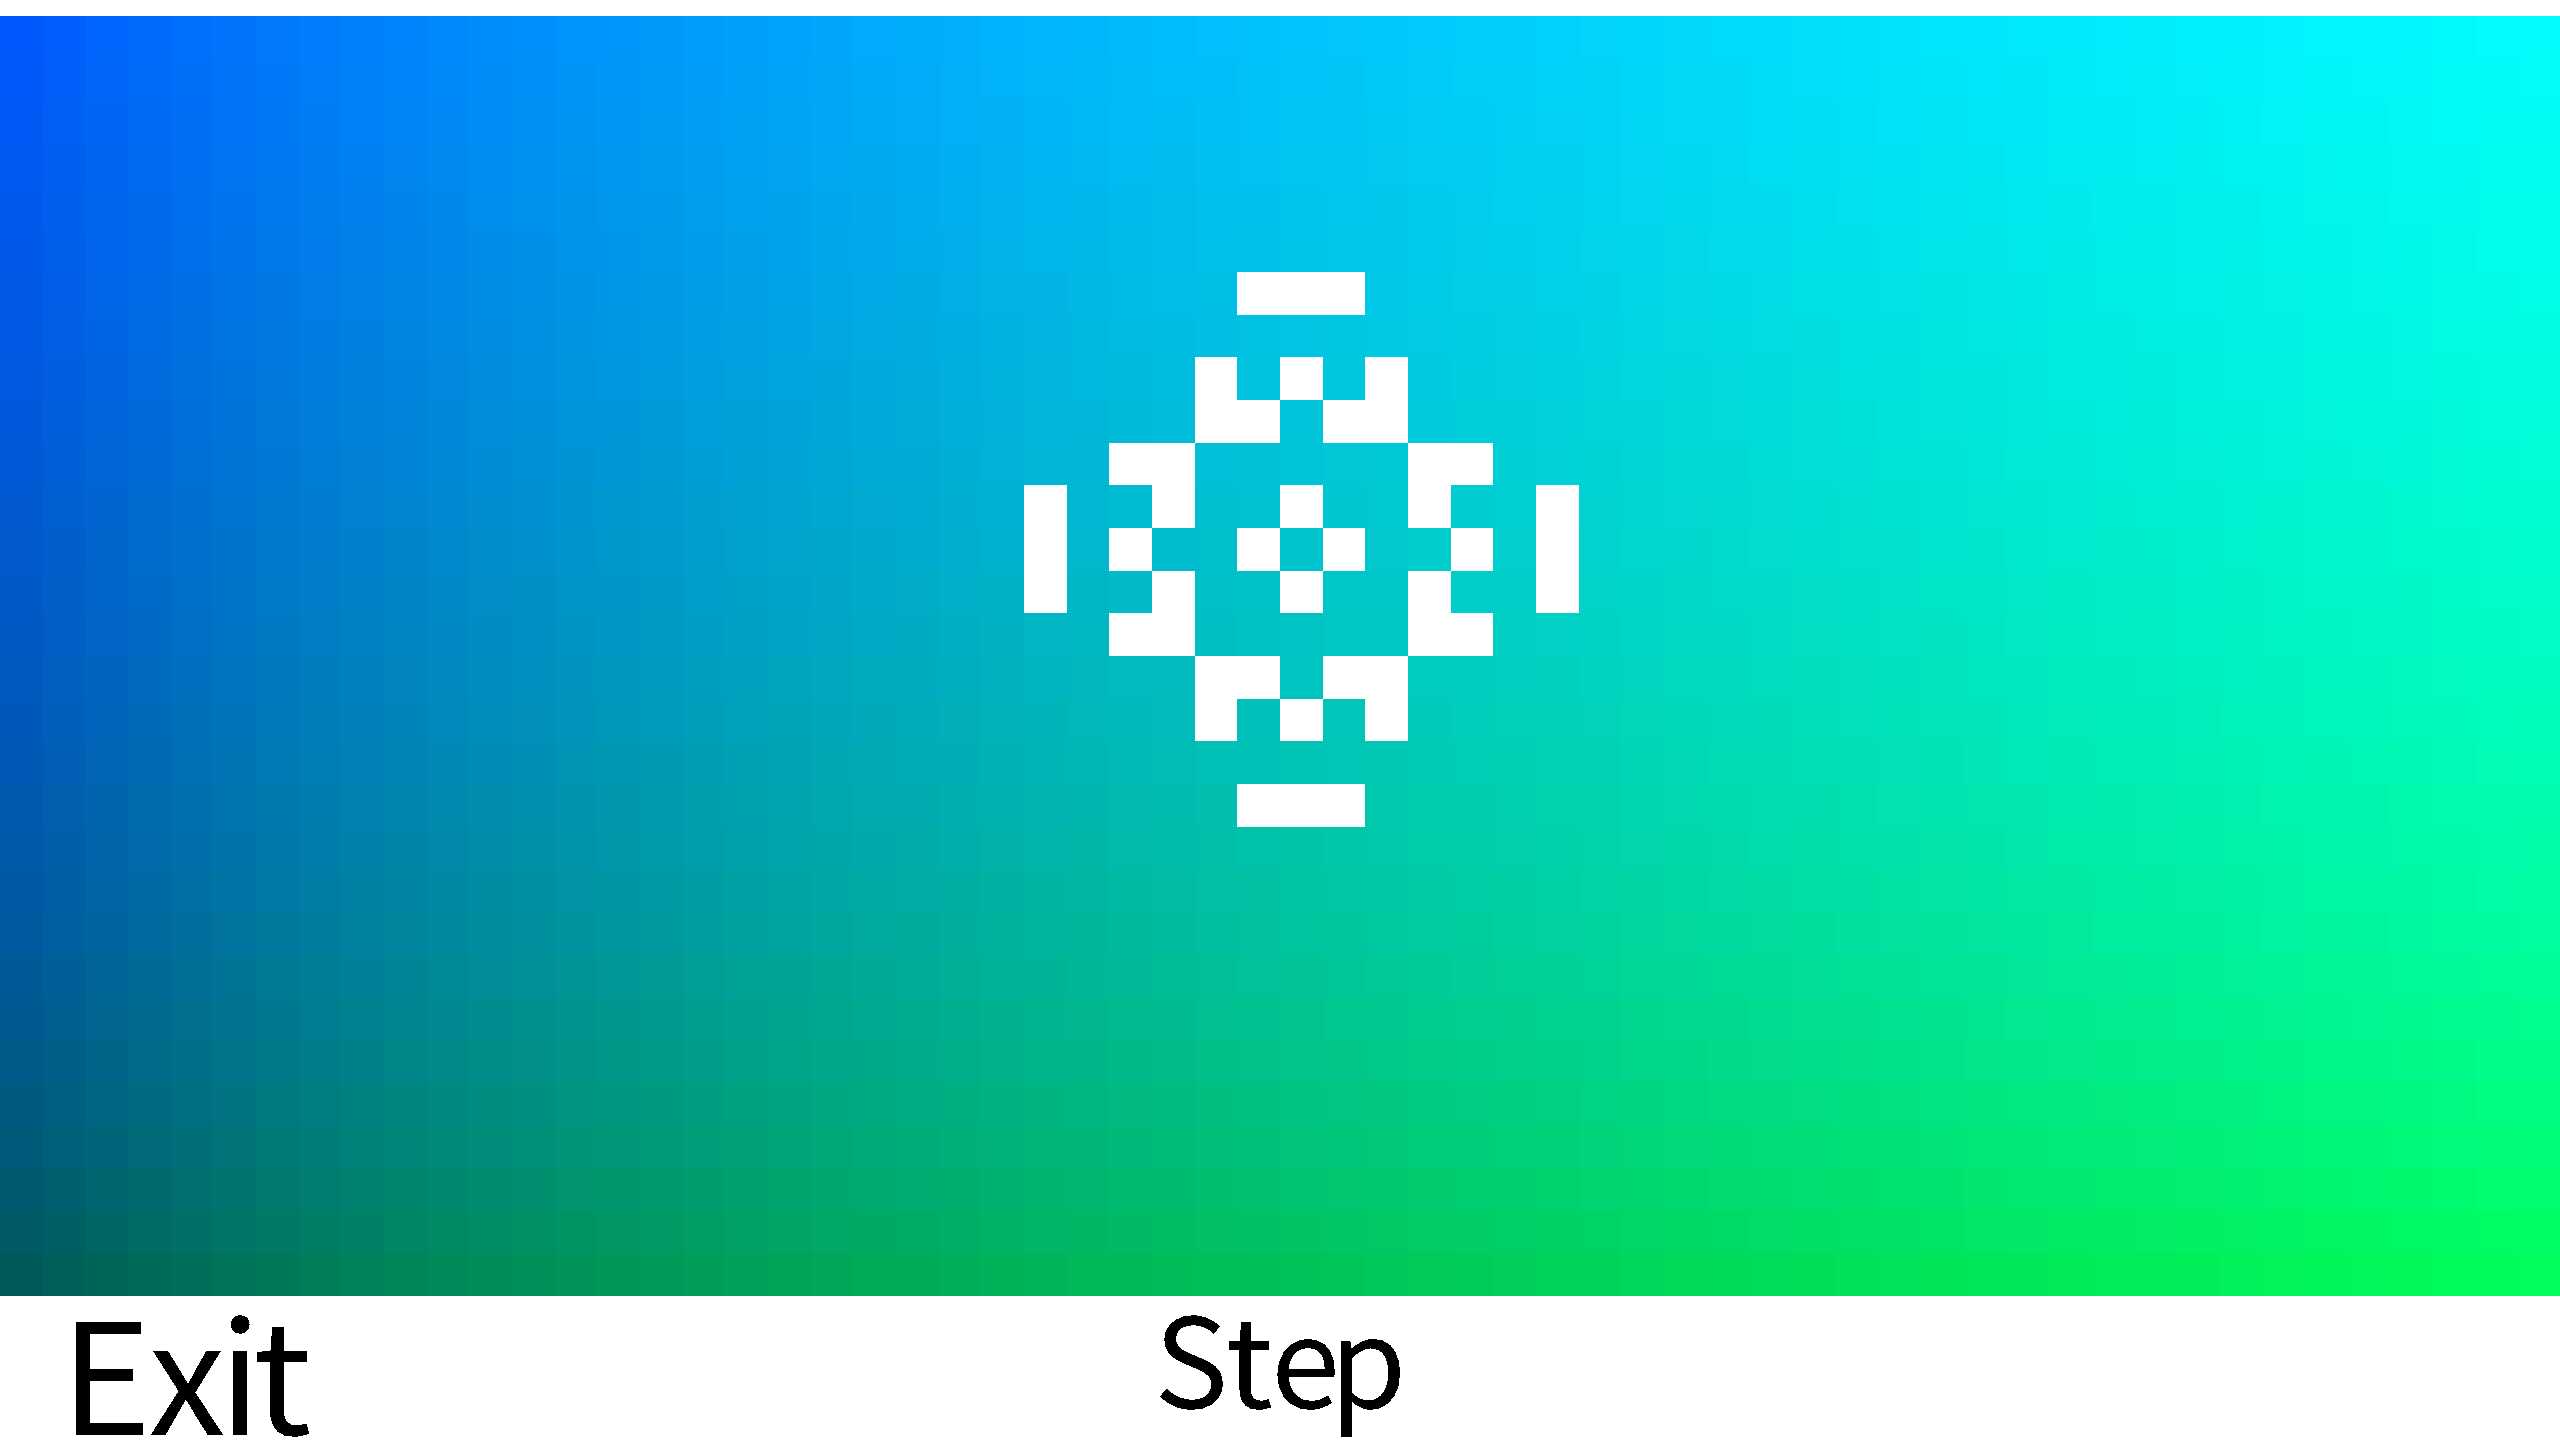 a simple example of Conway's game of life